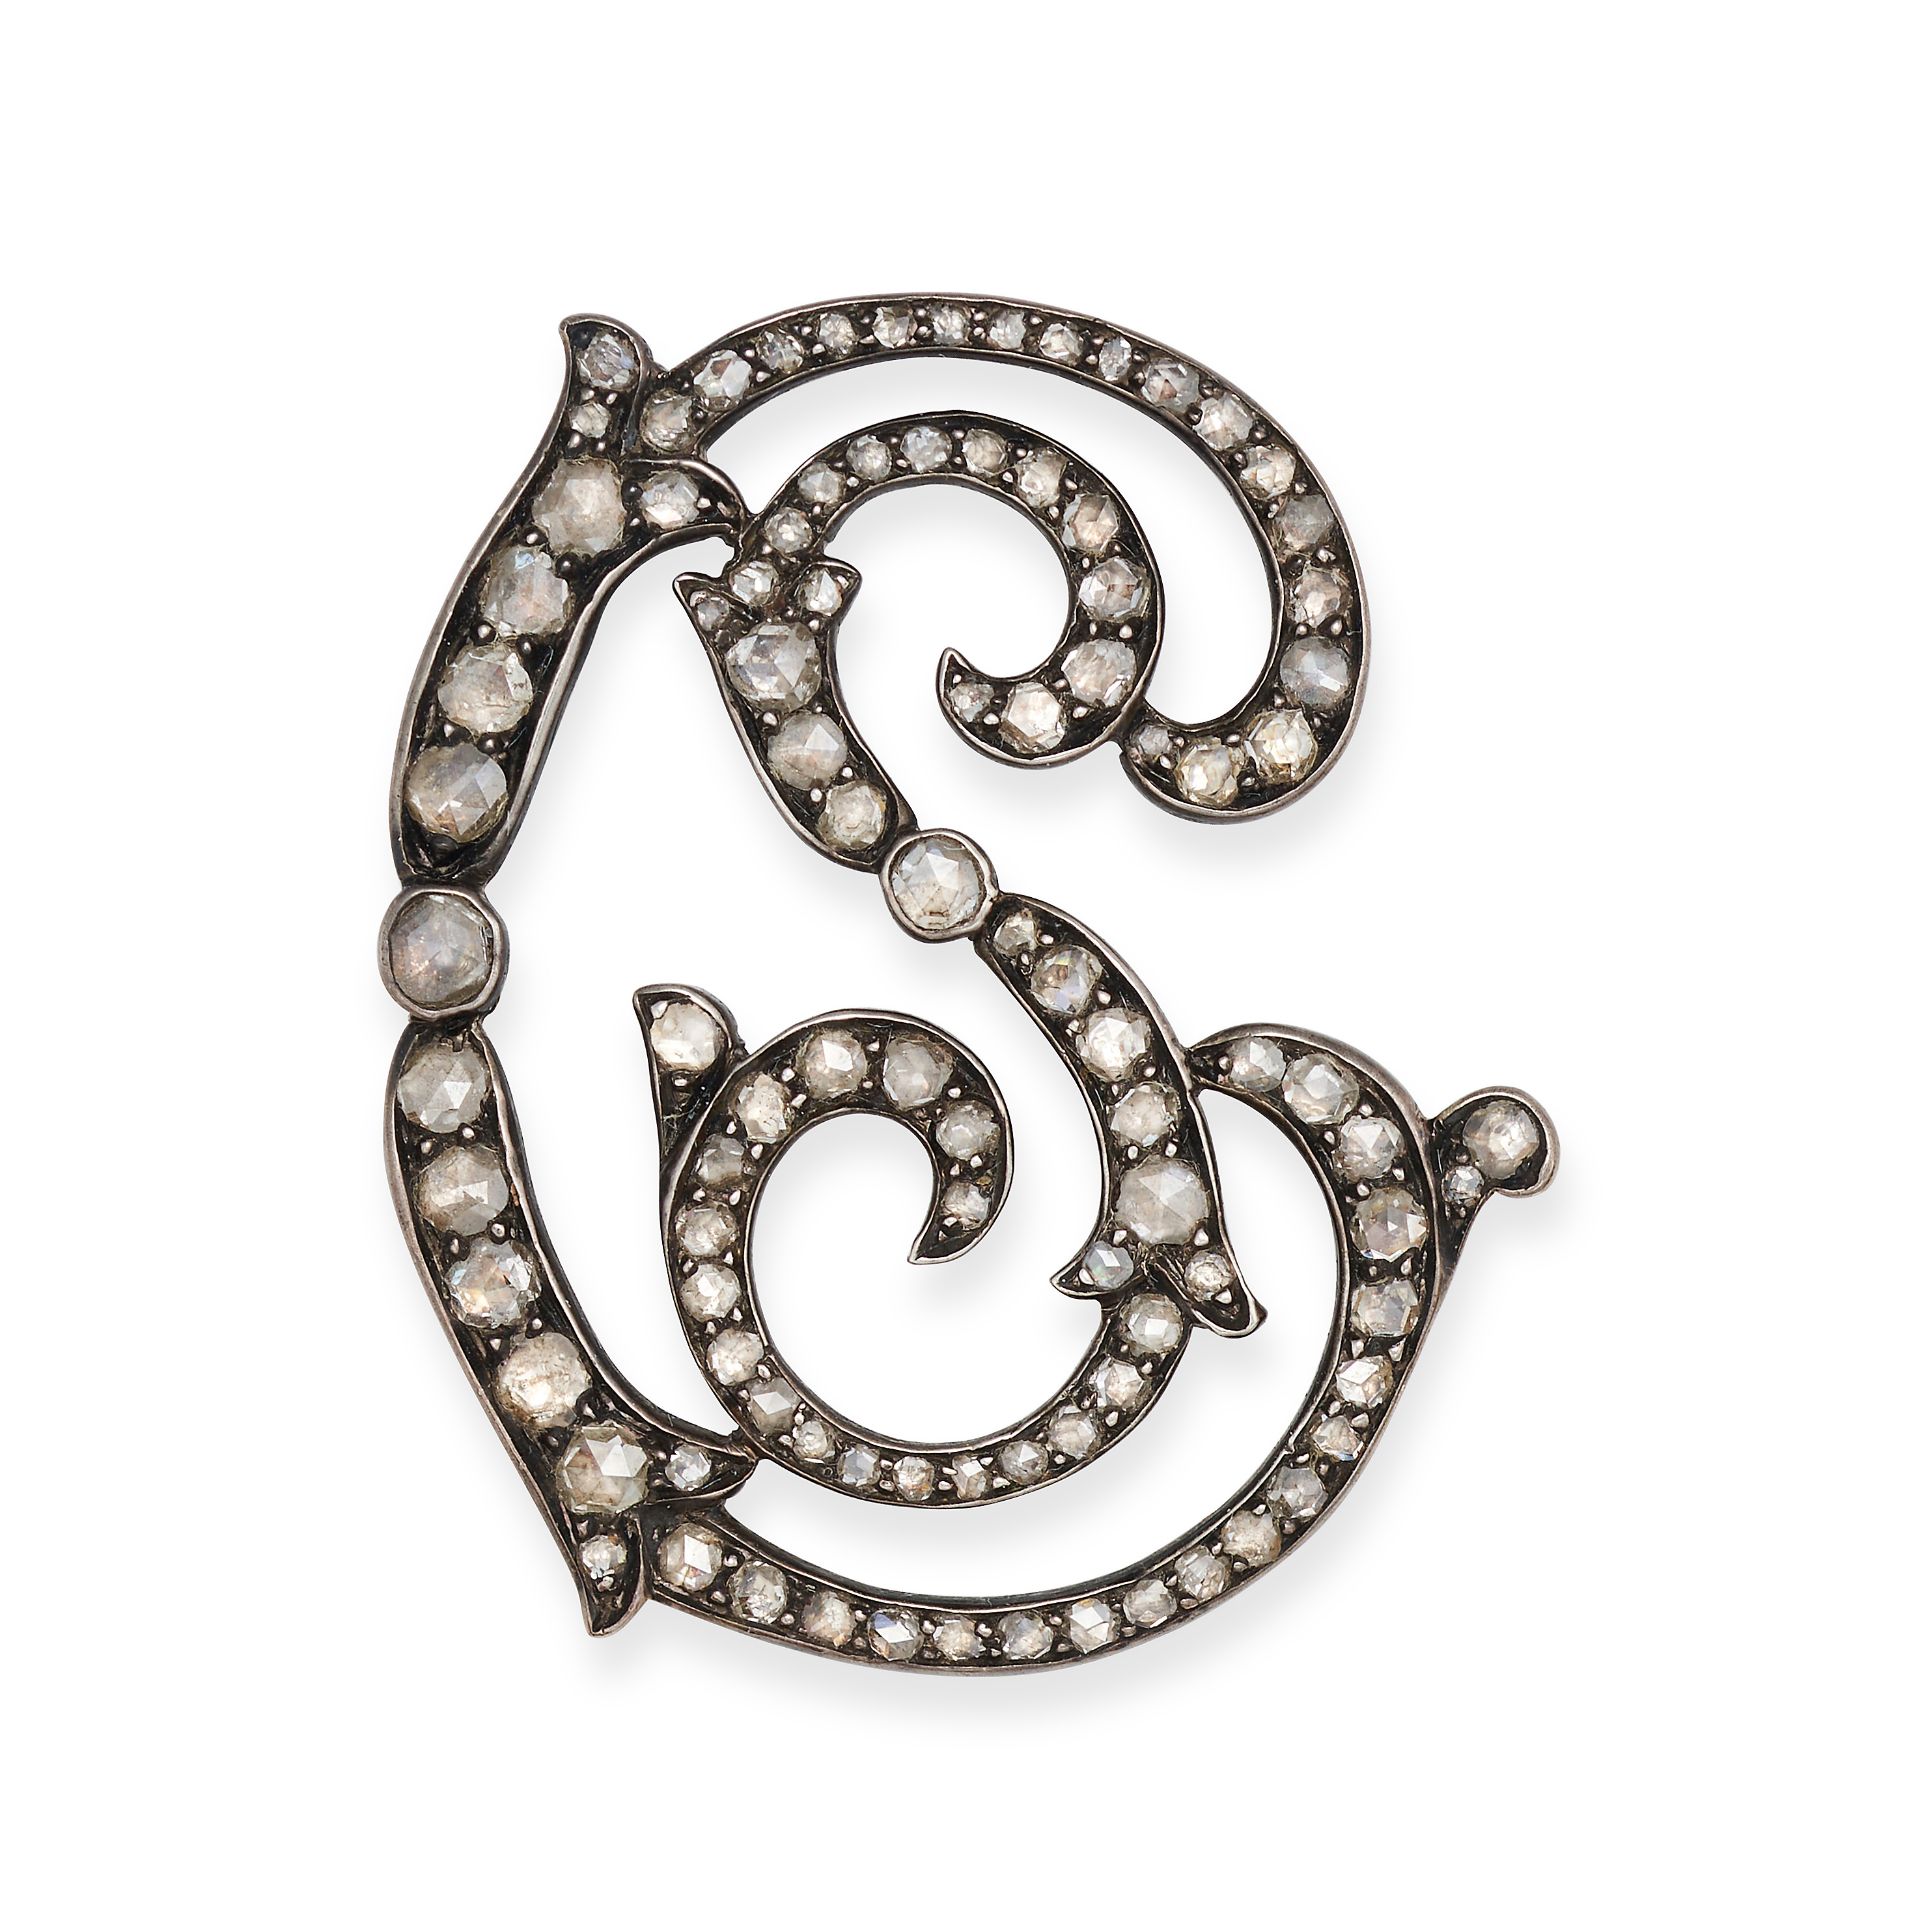 NO RESERVE - AN ANTIQUE DIAMOND JEWEL in silver, designed as the initials CS set throughout with ...